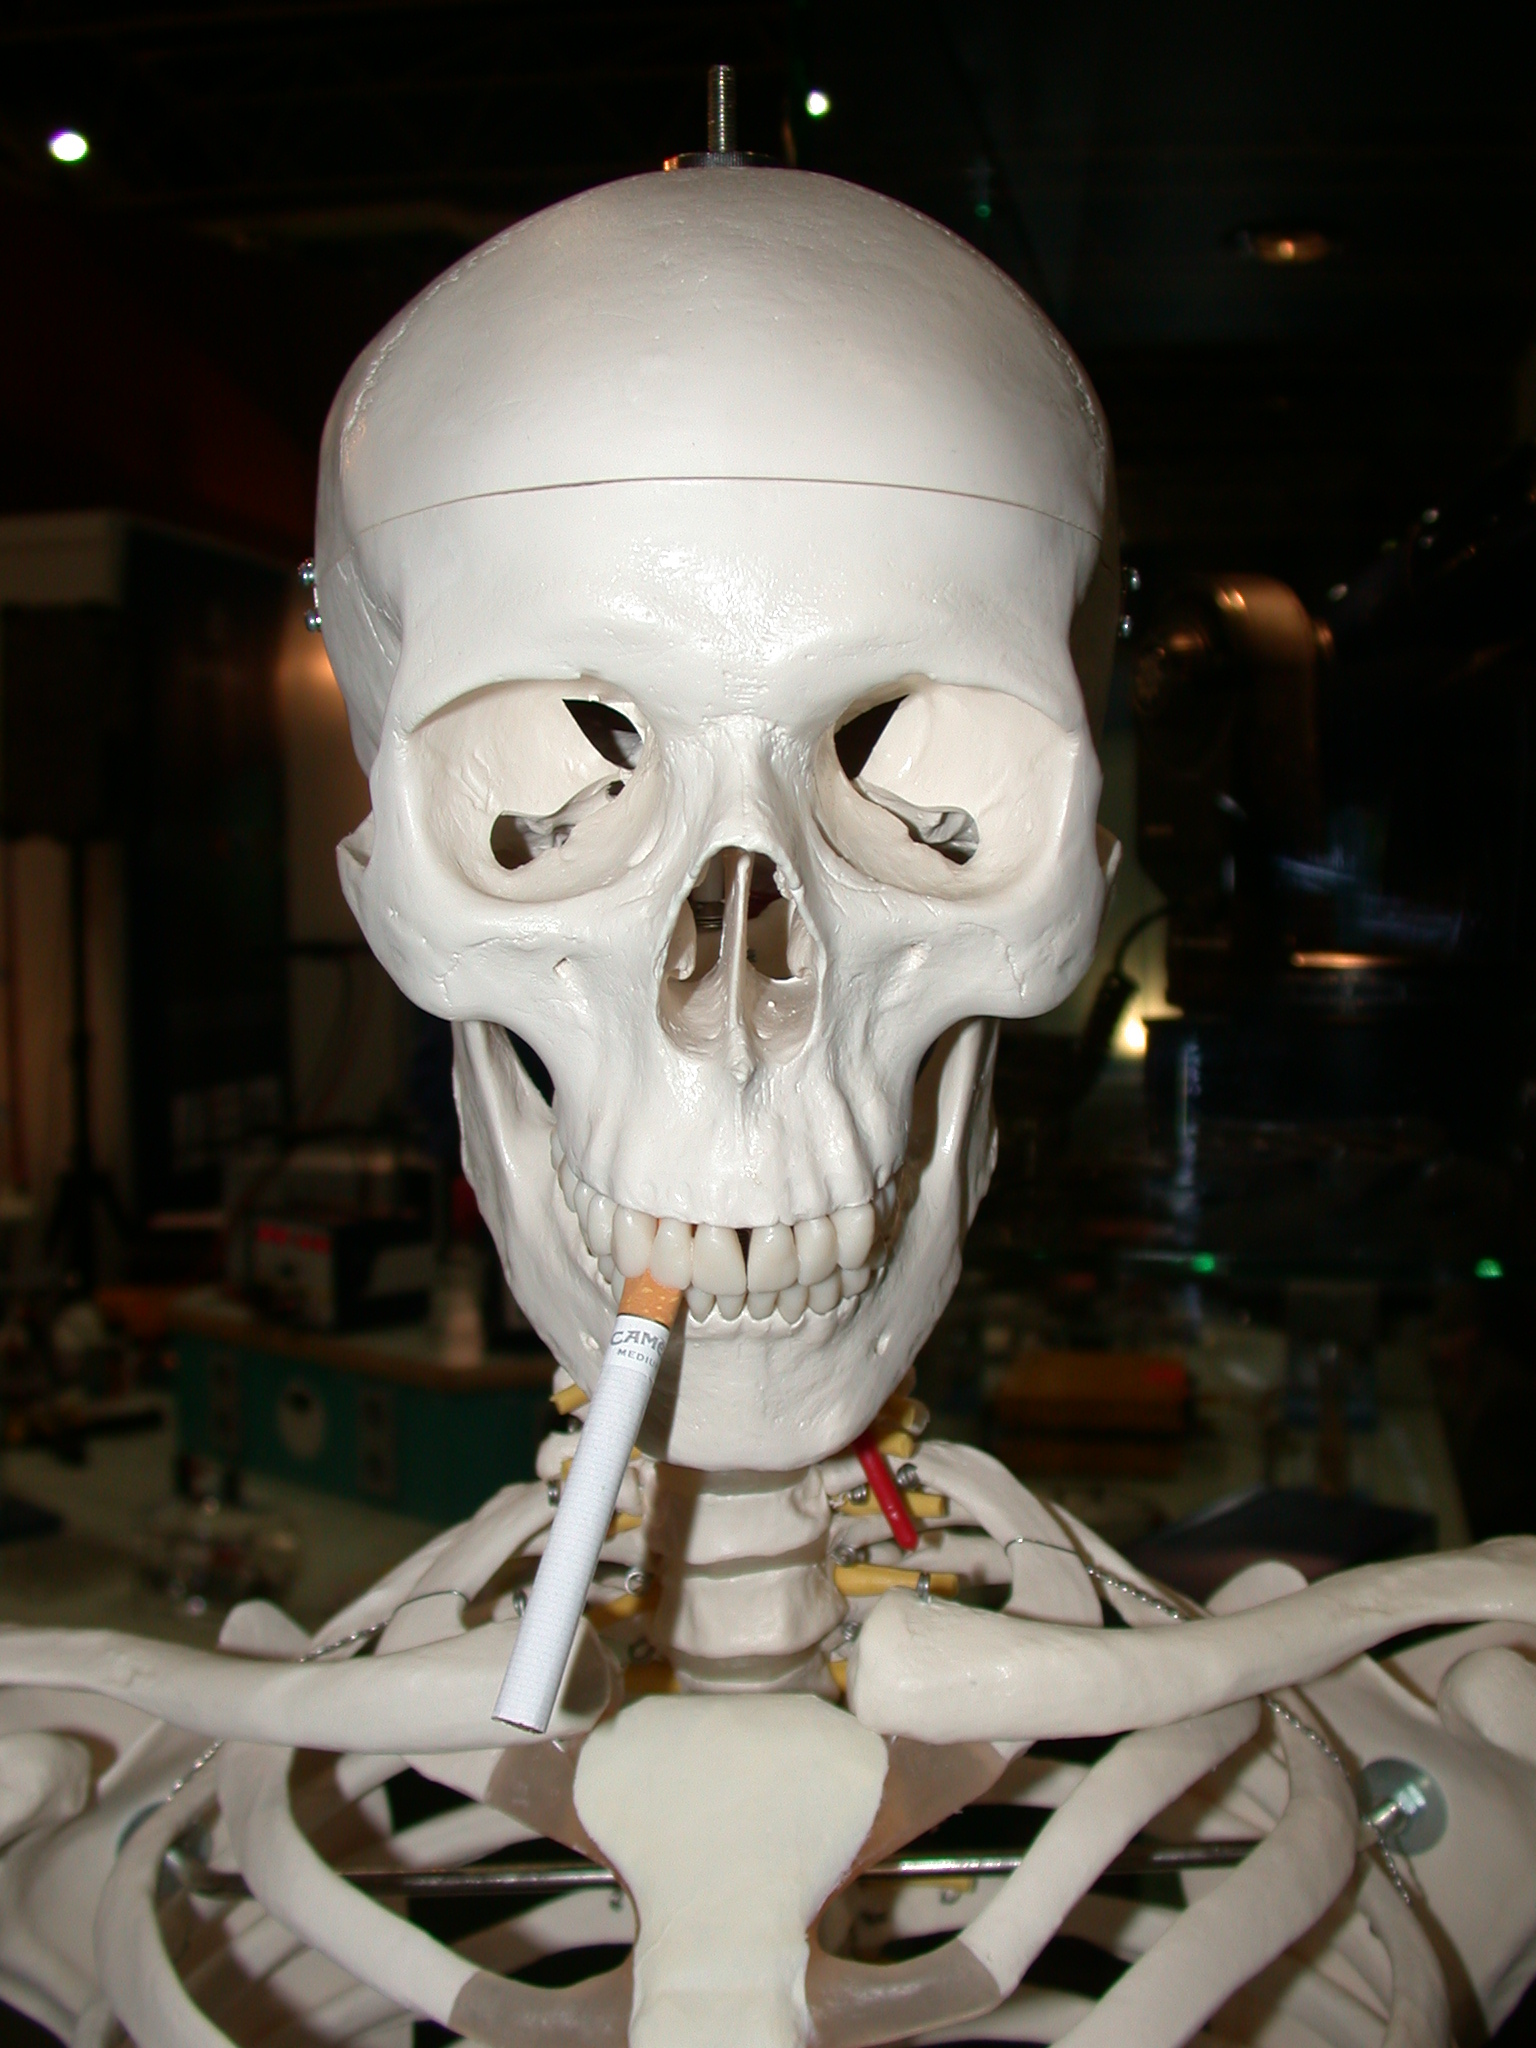 smoking kills and gives you amazingly clean teeth in this case :) skelleton sigarette smoke skull jaw bones plastic